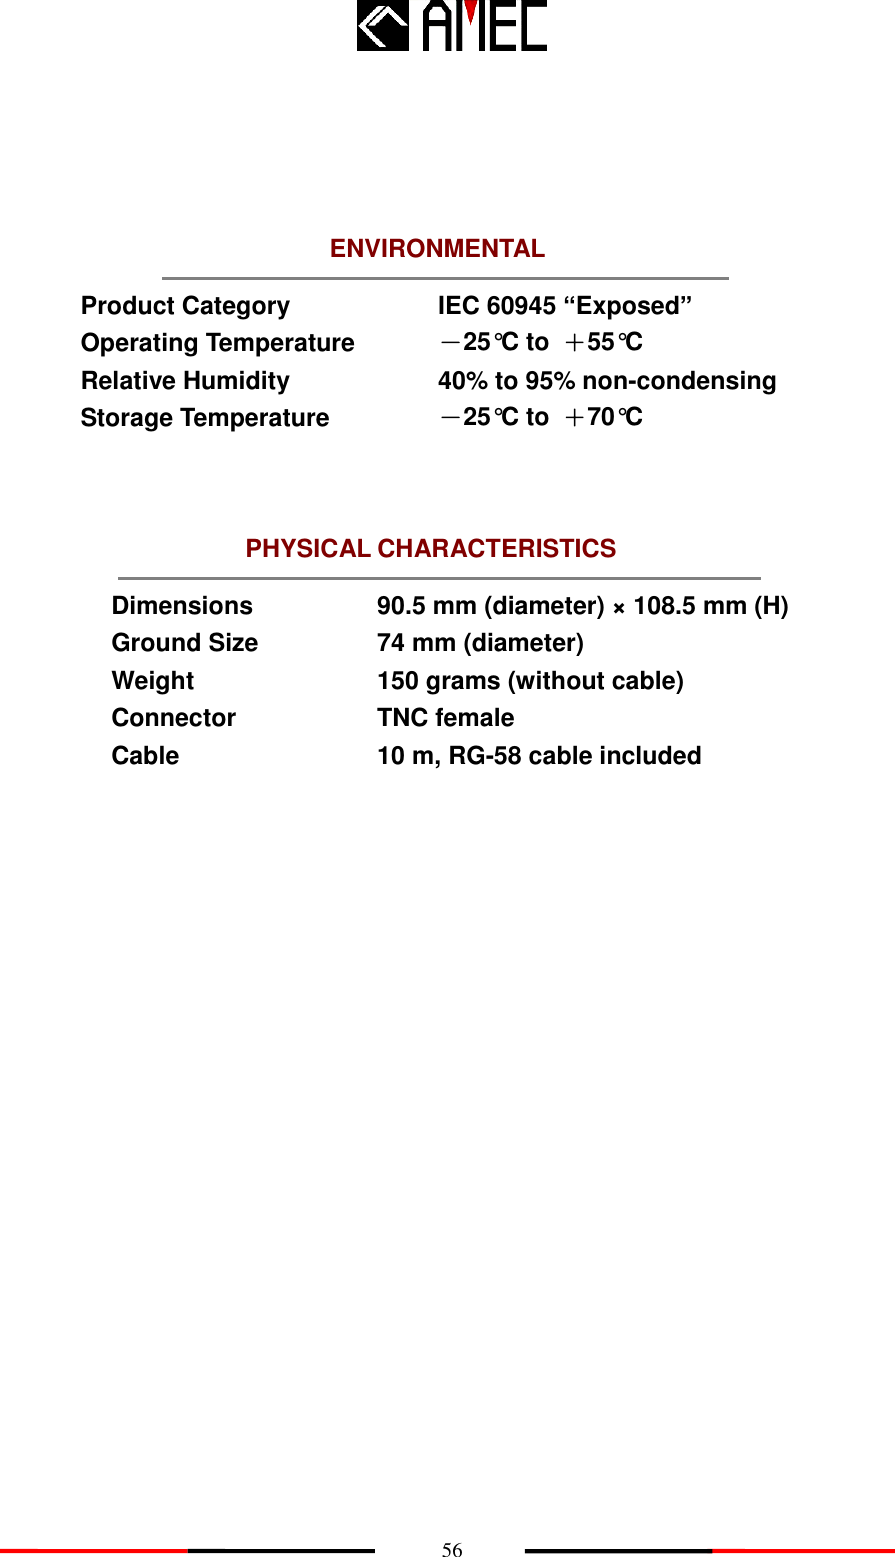    56 PHYSICAL CHARACTERISTICS ENVIRONMENTAL       Product Category IEC 60945 “Exposed” Operating Temperature   －25°C to  ＋55°C Relative Humidity 40% to 95% non-condensing Storage Temperature －25°C to  ＋70°C     Dimensions 90.5 mm (diameter) × 108.5 mm (H) Ground Size 74 mm (diameter) Weight 150 grams (without cable) Connector TNC female Cable 10 m, RG-58 cable included     